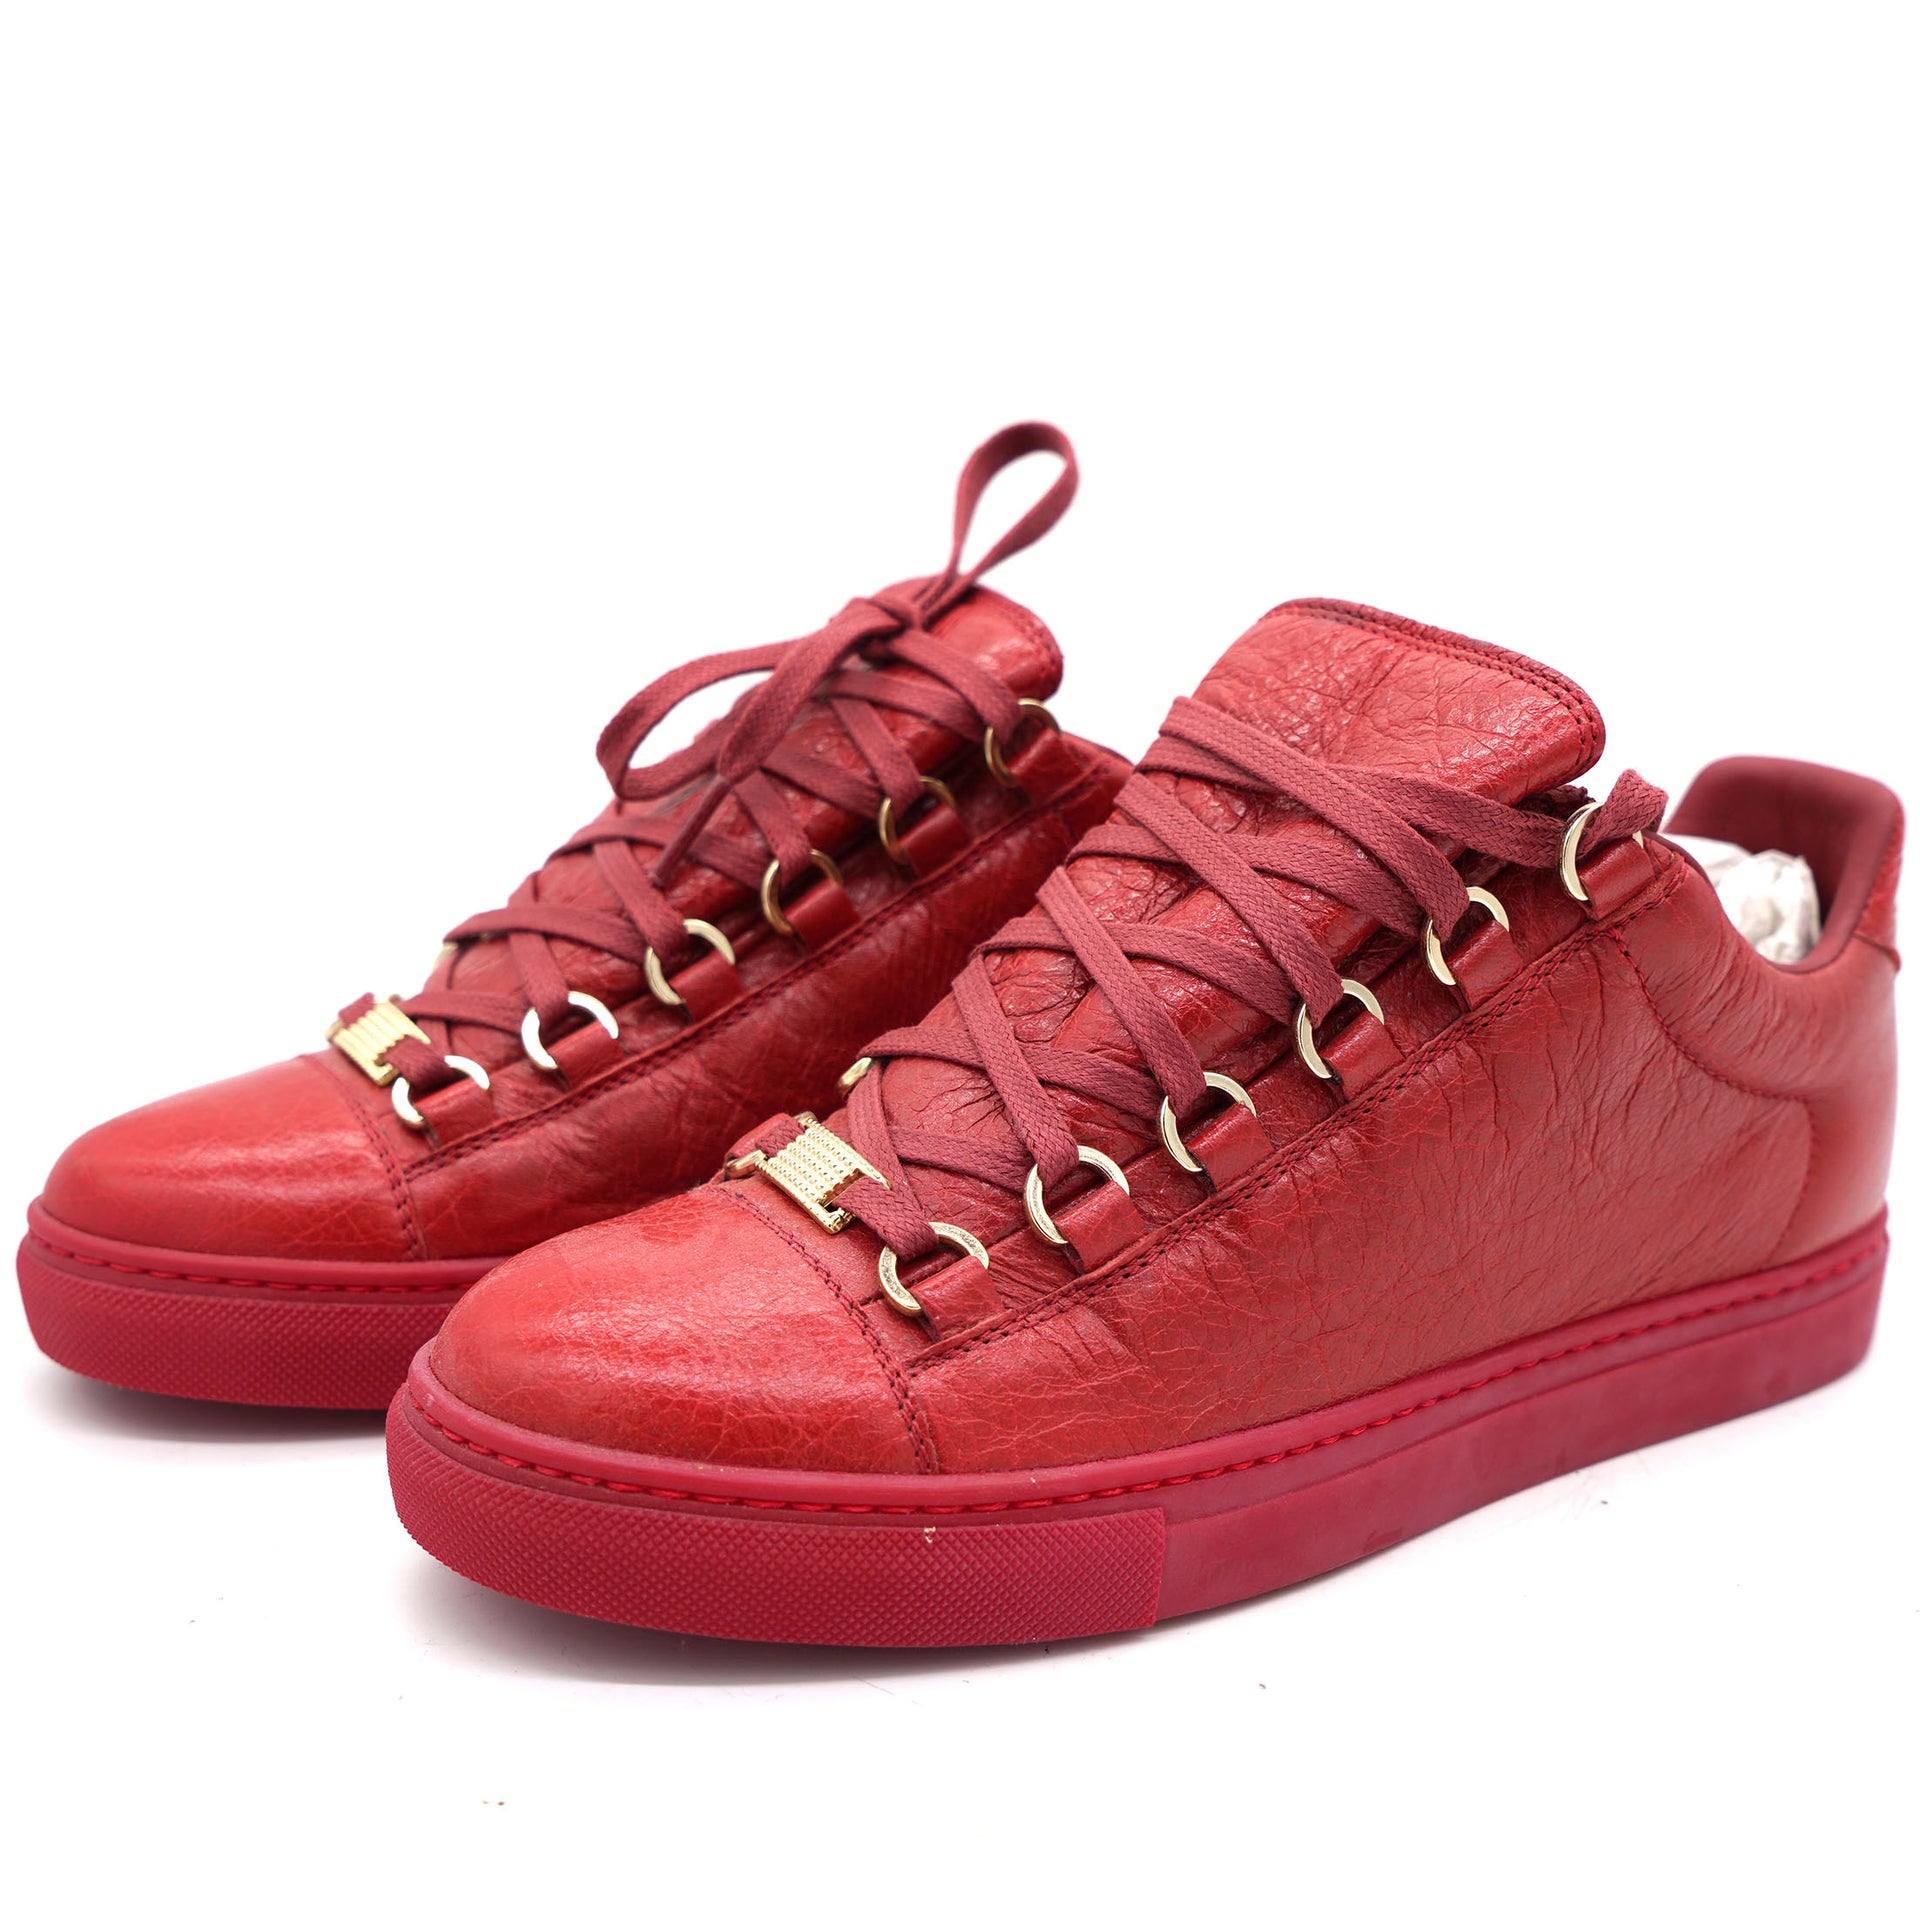 BALENCIAGA SEE THROUGH SIDES HIGH TOP SNEAKERS PATENT LEATHER 47 14 US  AUTHENTIC  eBay